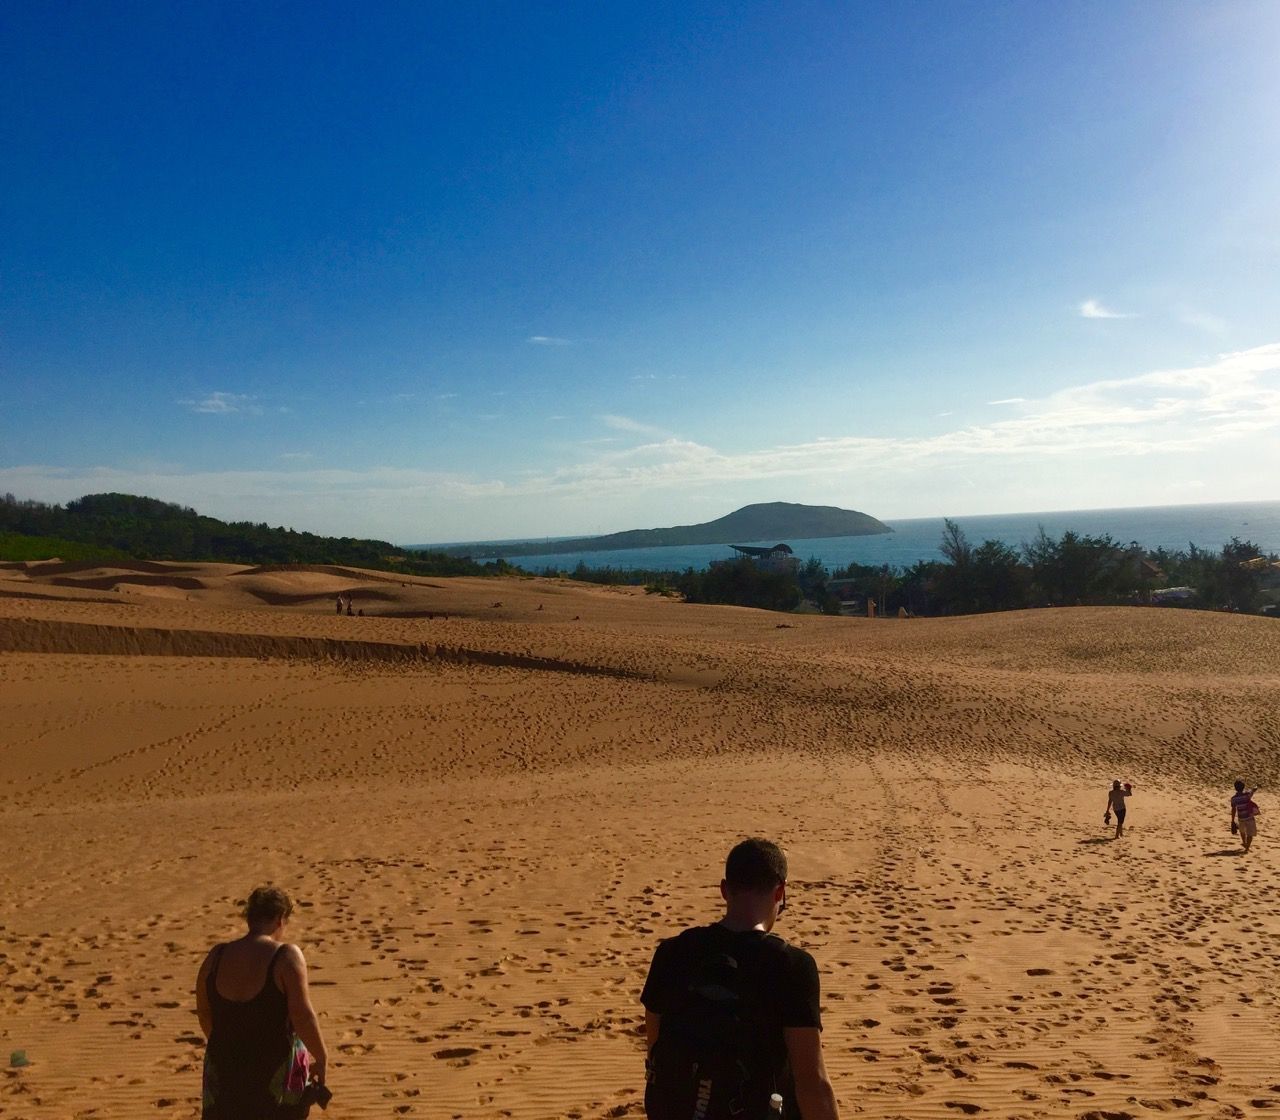 People walking on the red sand dunes.